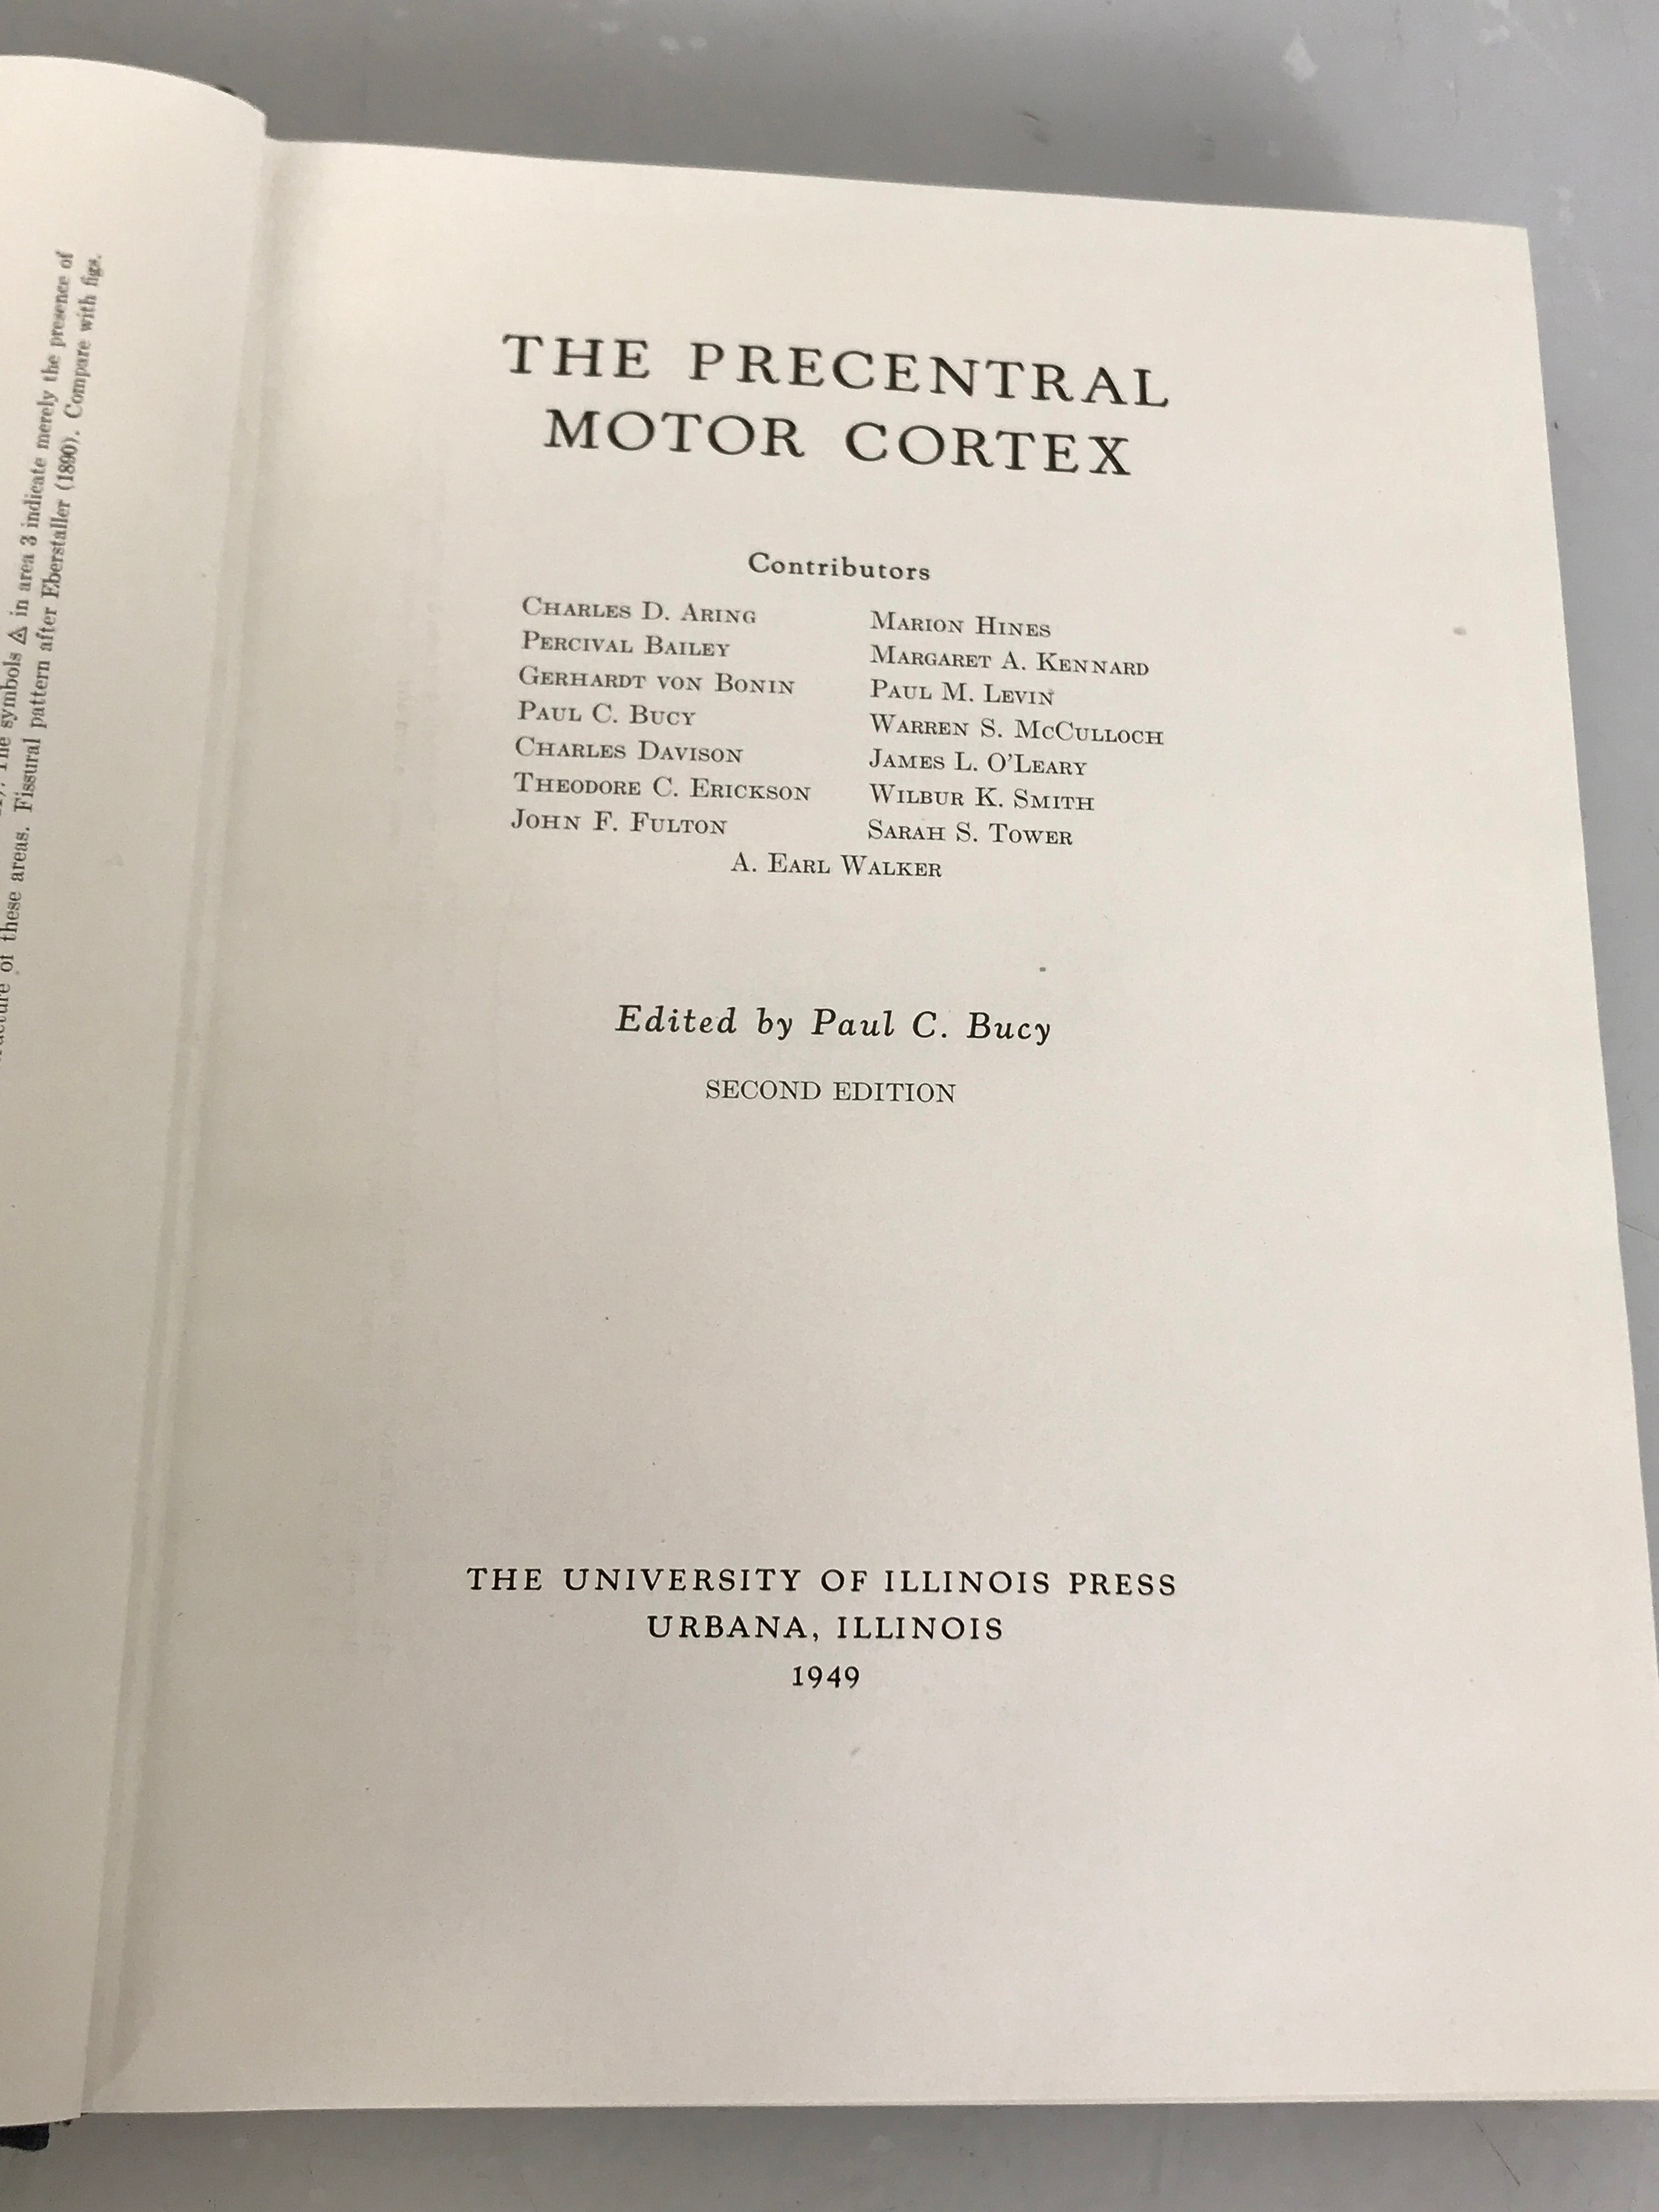 The Precentral Motor Cortex by Paul Bucy Second Edition 1949 HC